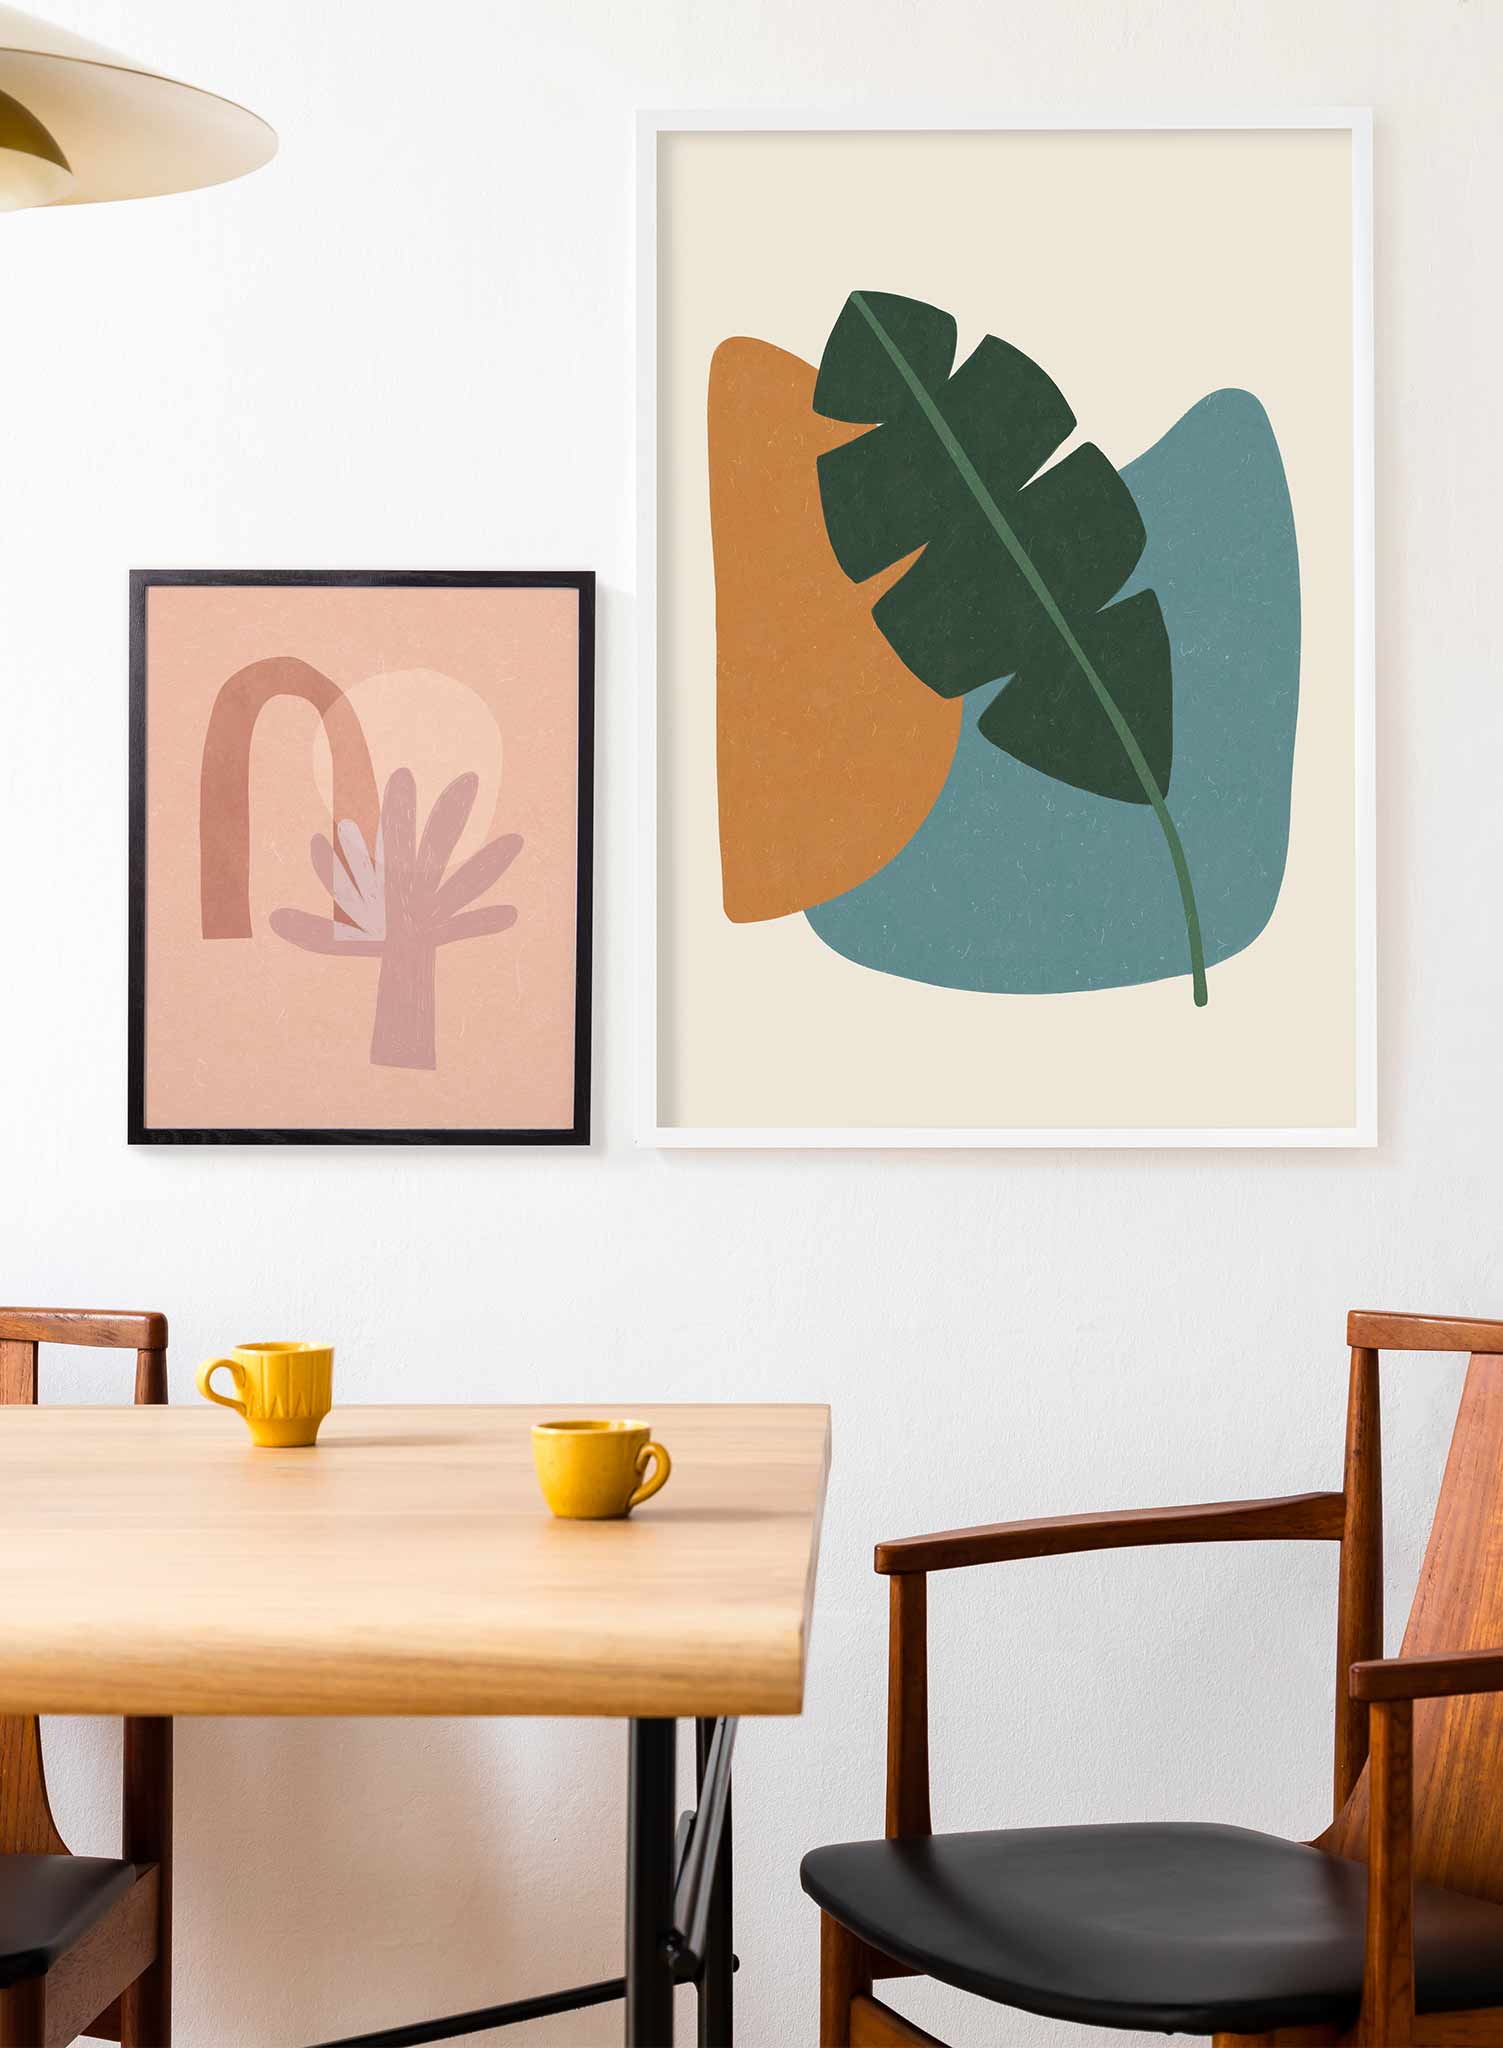 Banana Leaf is a minimalist a green banana leaf placed on top of an orange and teal circular shapes by Opposite Wall.